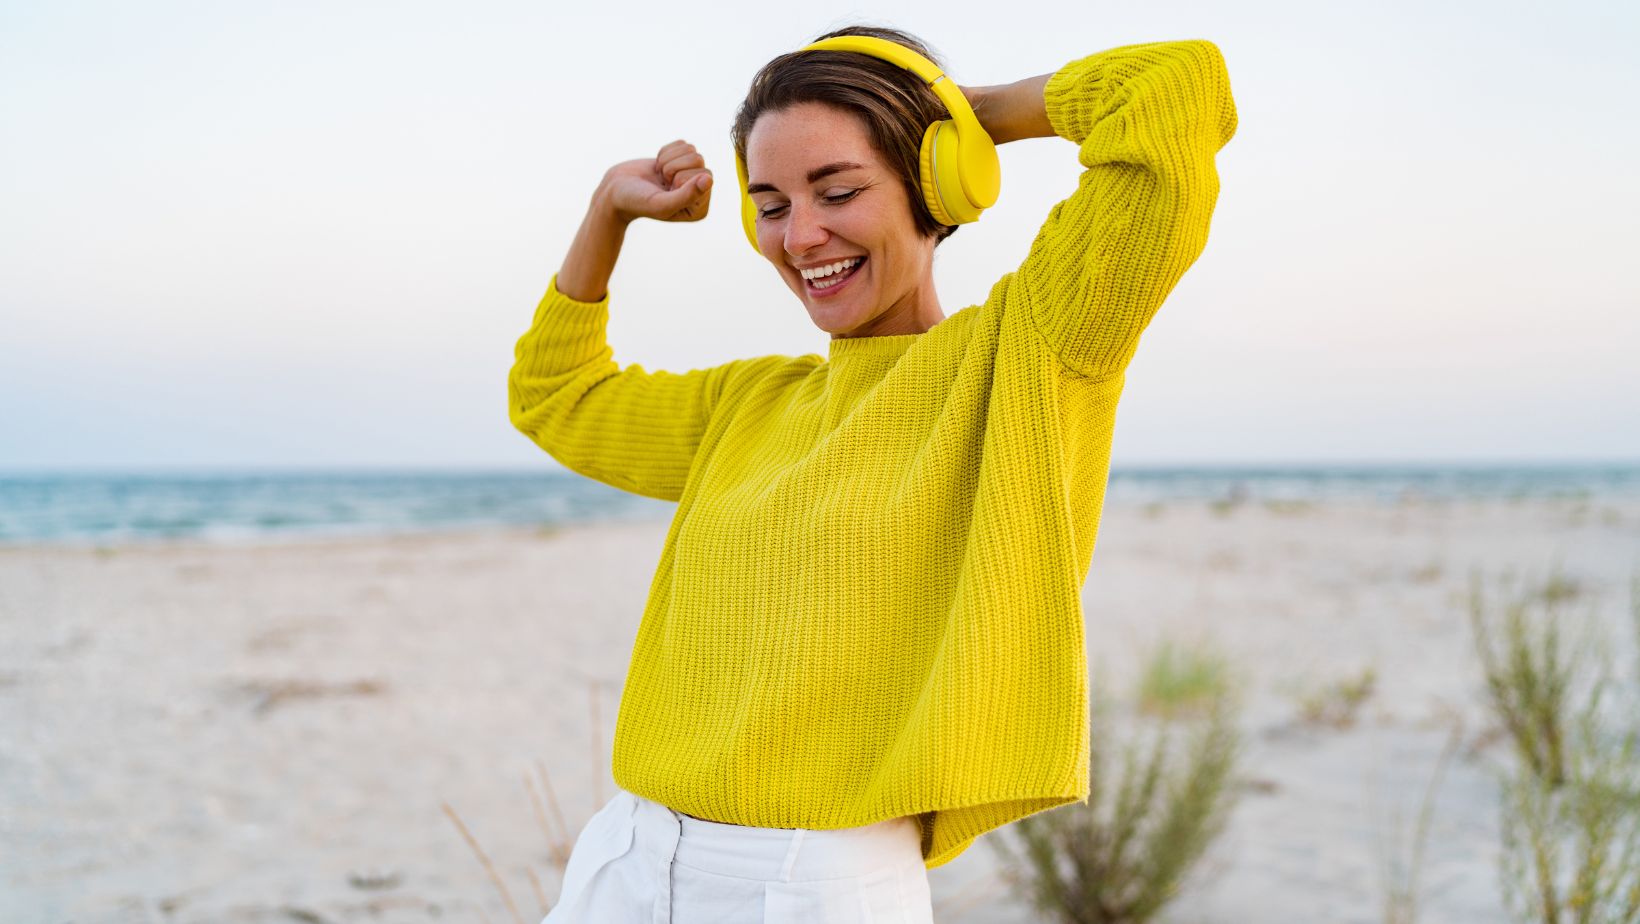 Protect Your Hearing This Summer